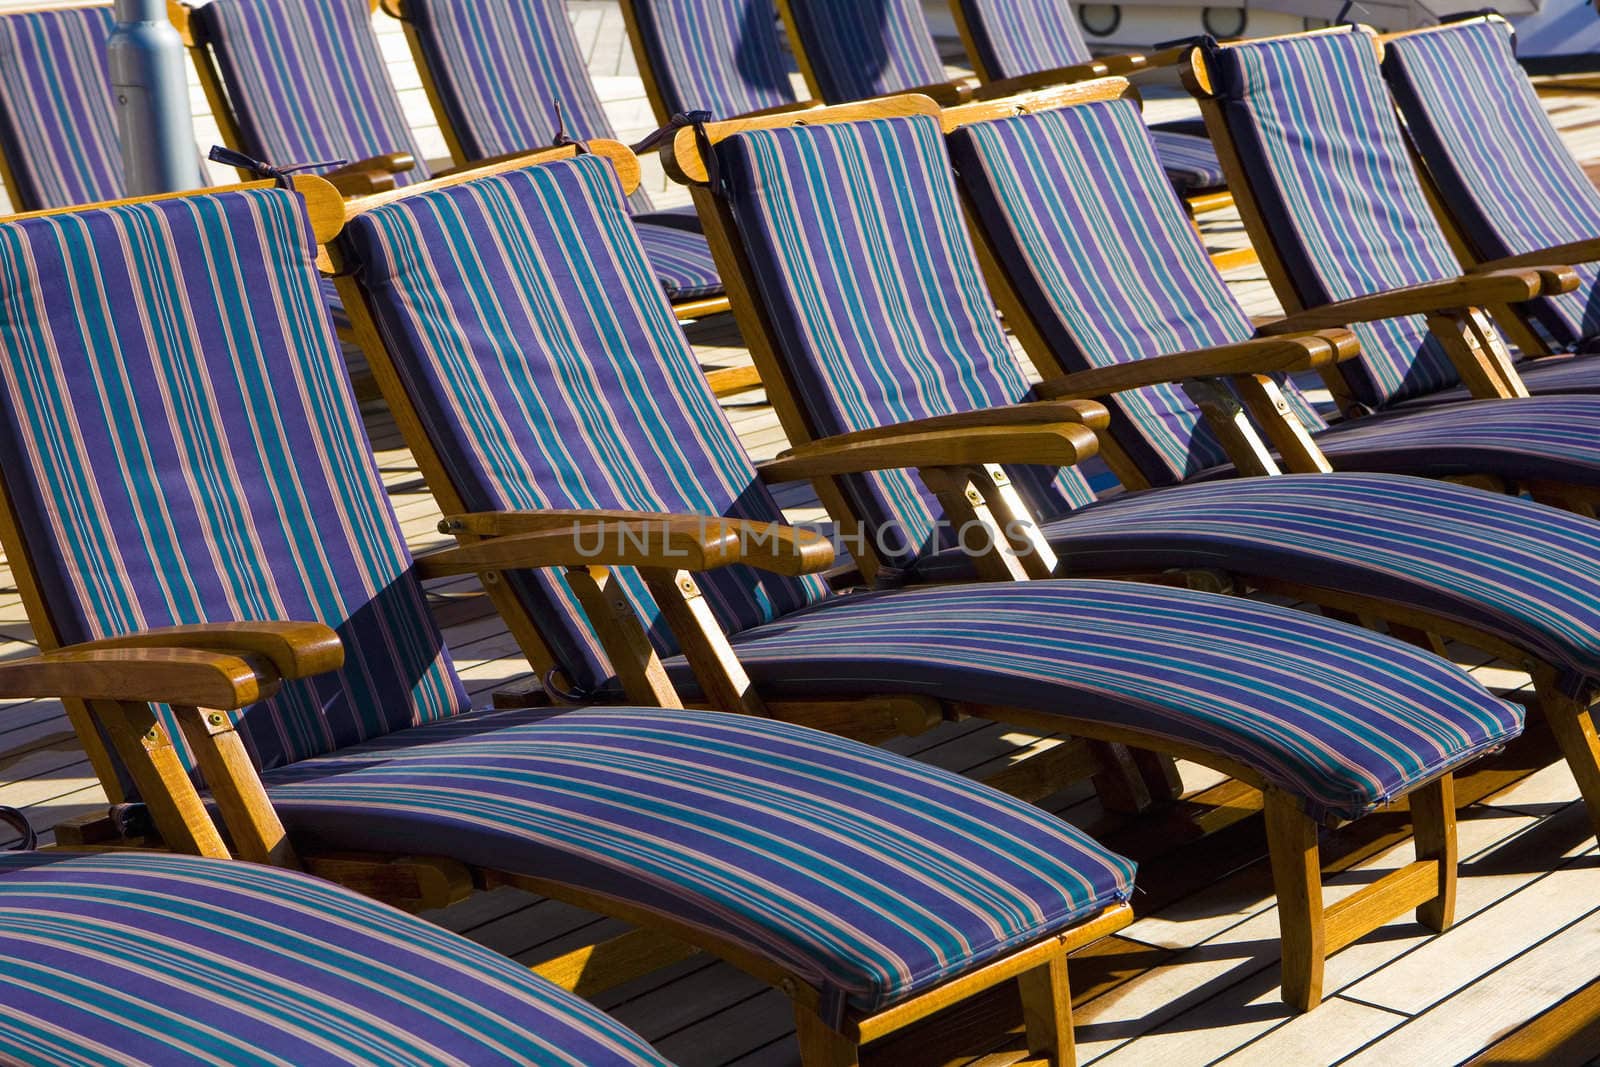 Deck Chairs on Cruise Ship by hotflash2001